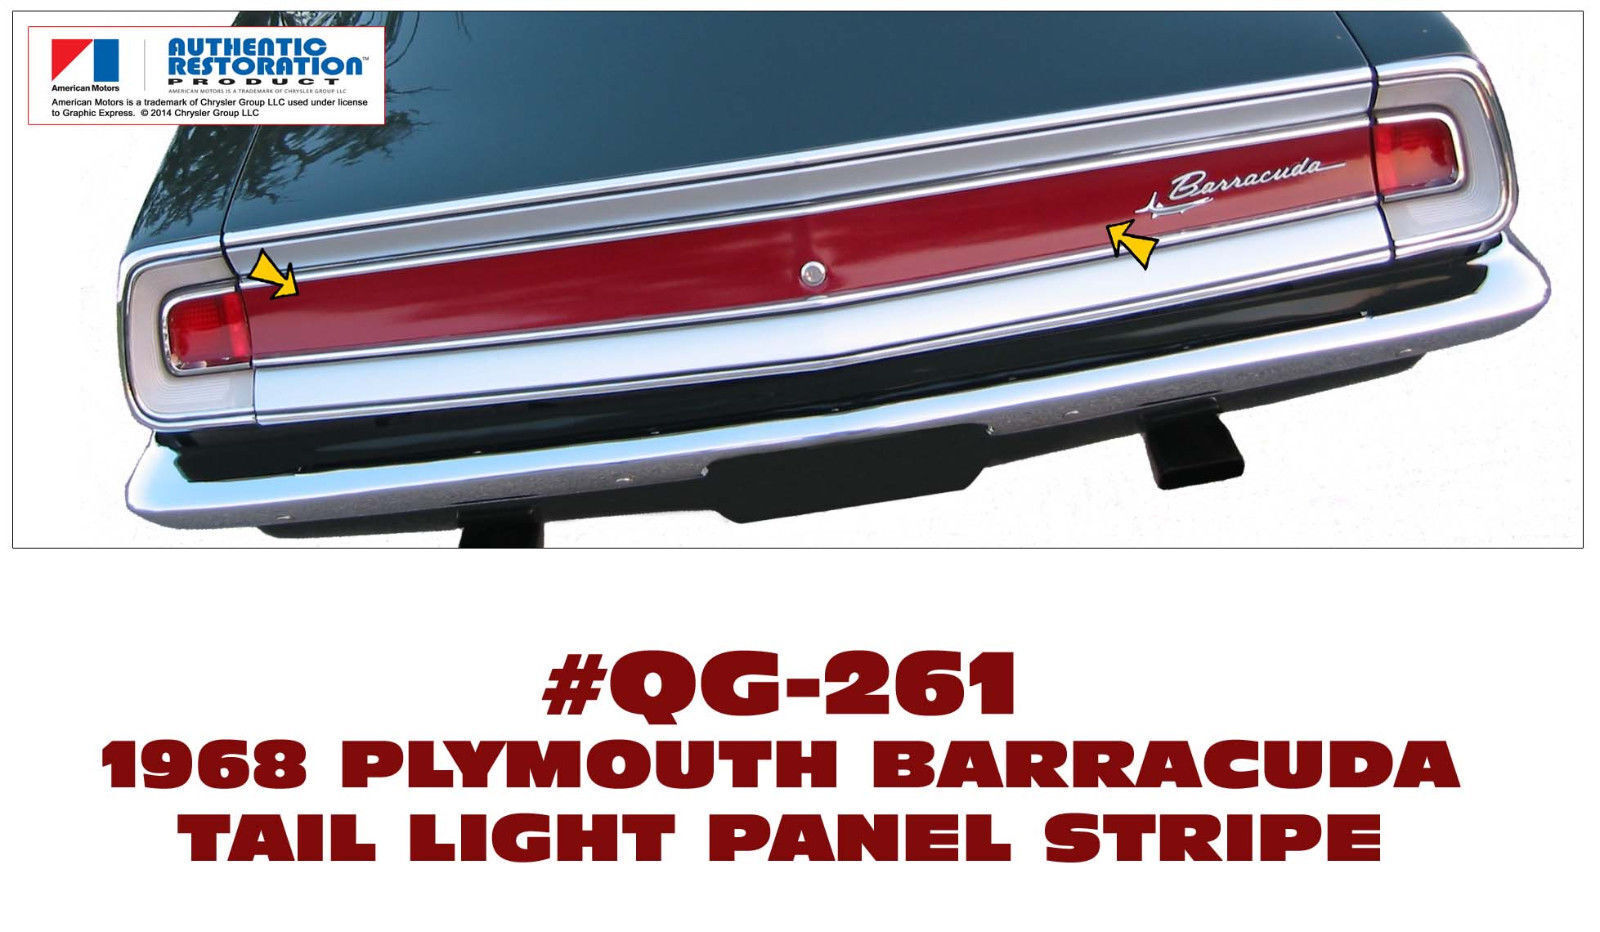 GE-QG-261 1968 PLYMOUTH BARRACUDA - REAR TAIL LIGHT PANEL STRIPE - LICENSED